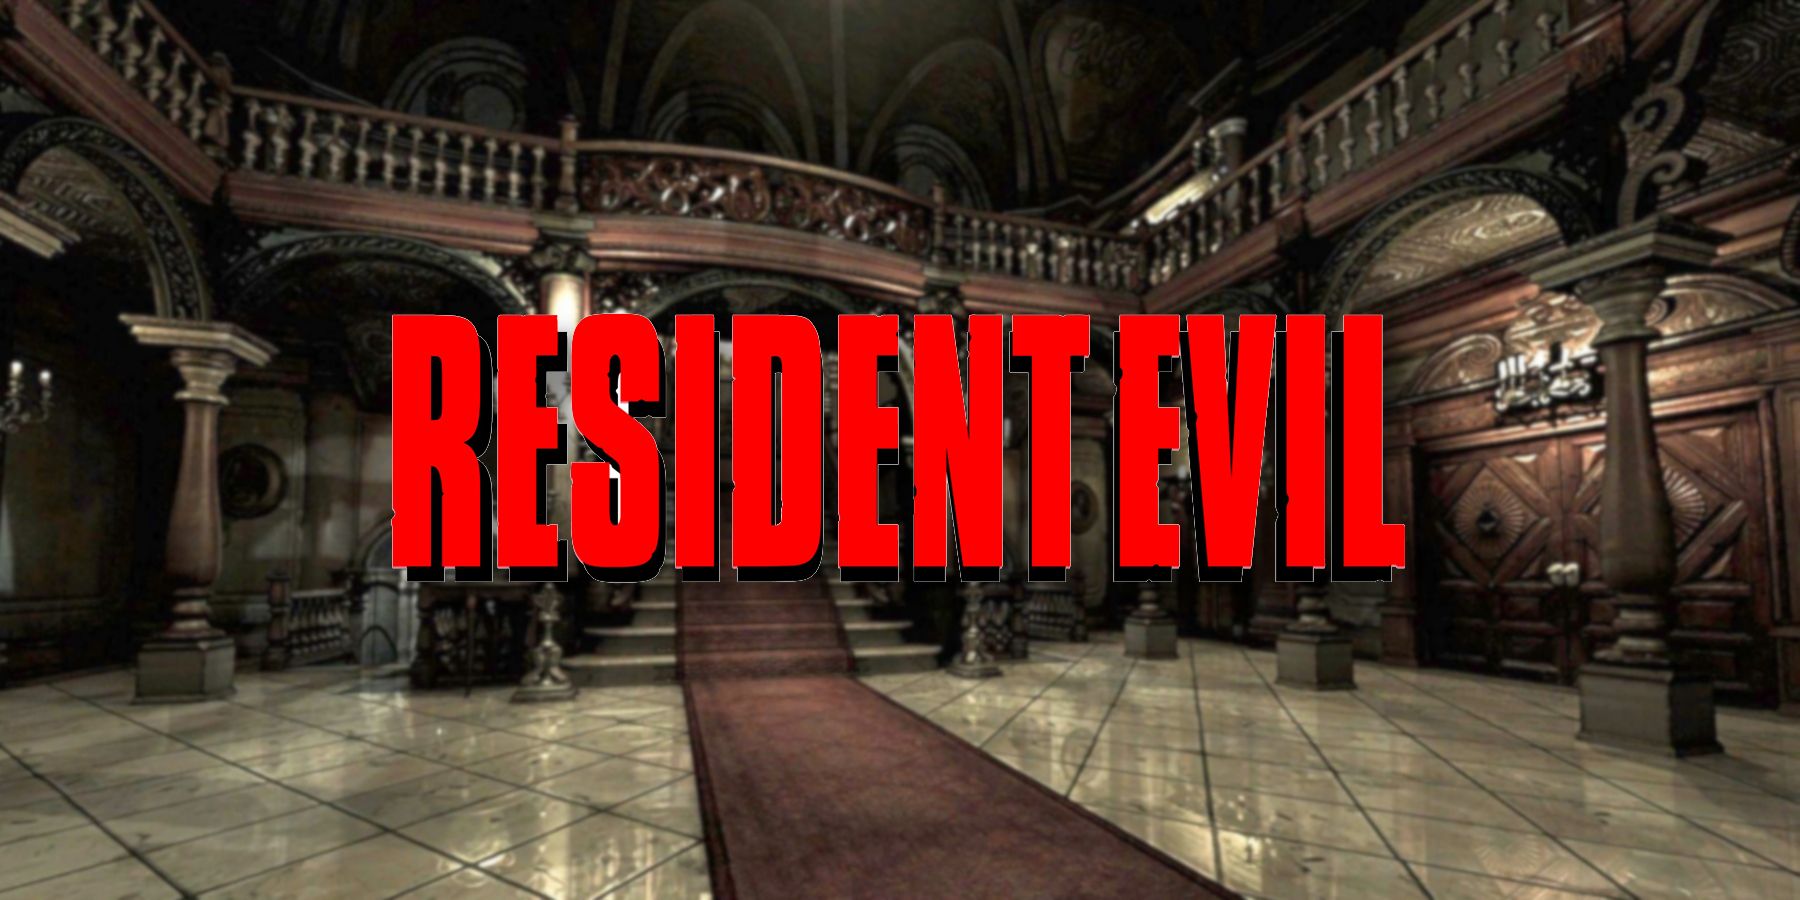 The original Resident Evil logo with the Spencer Mansion's entrance hall behind it.